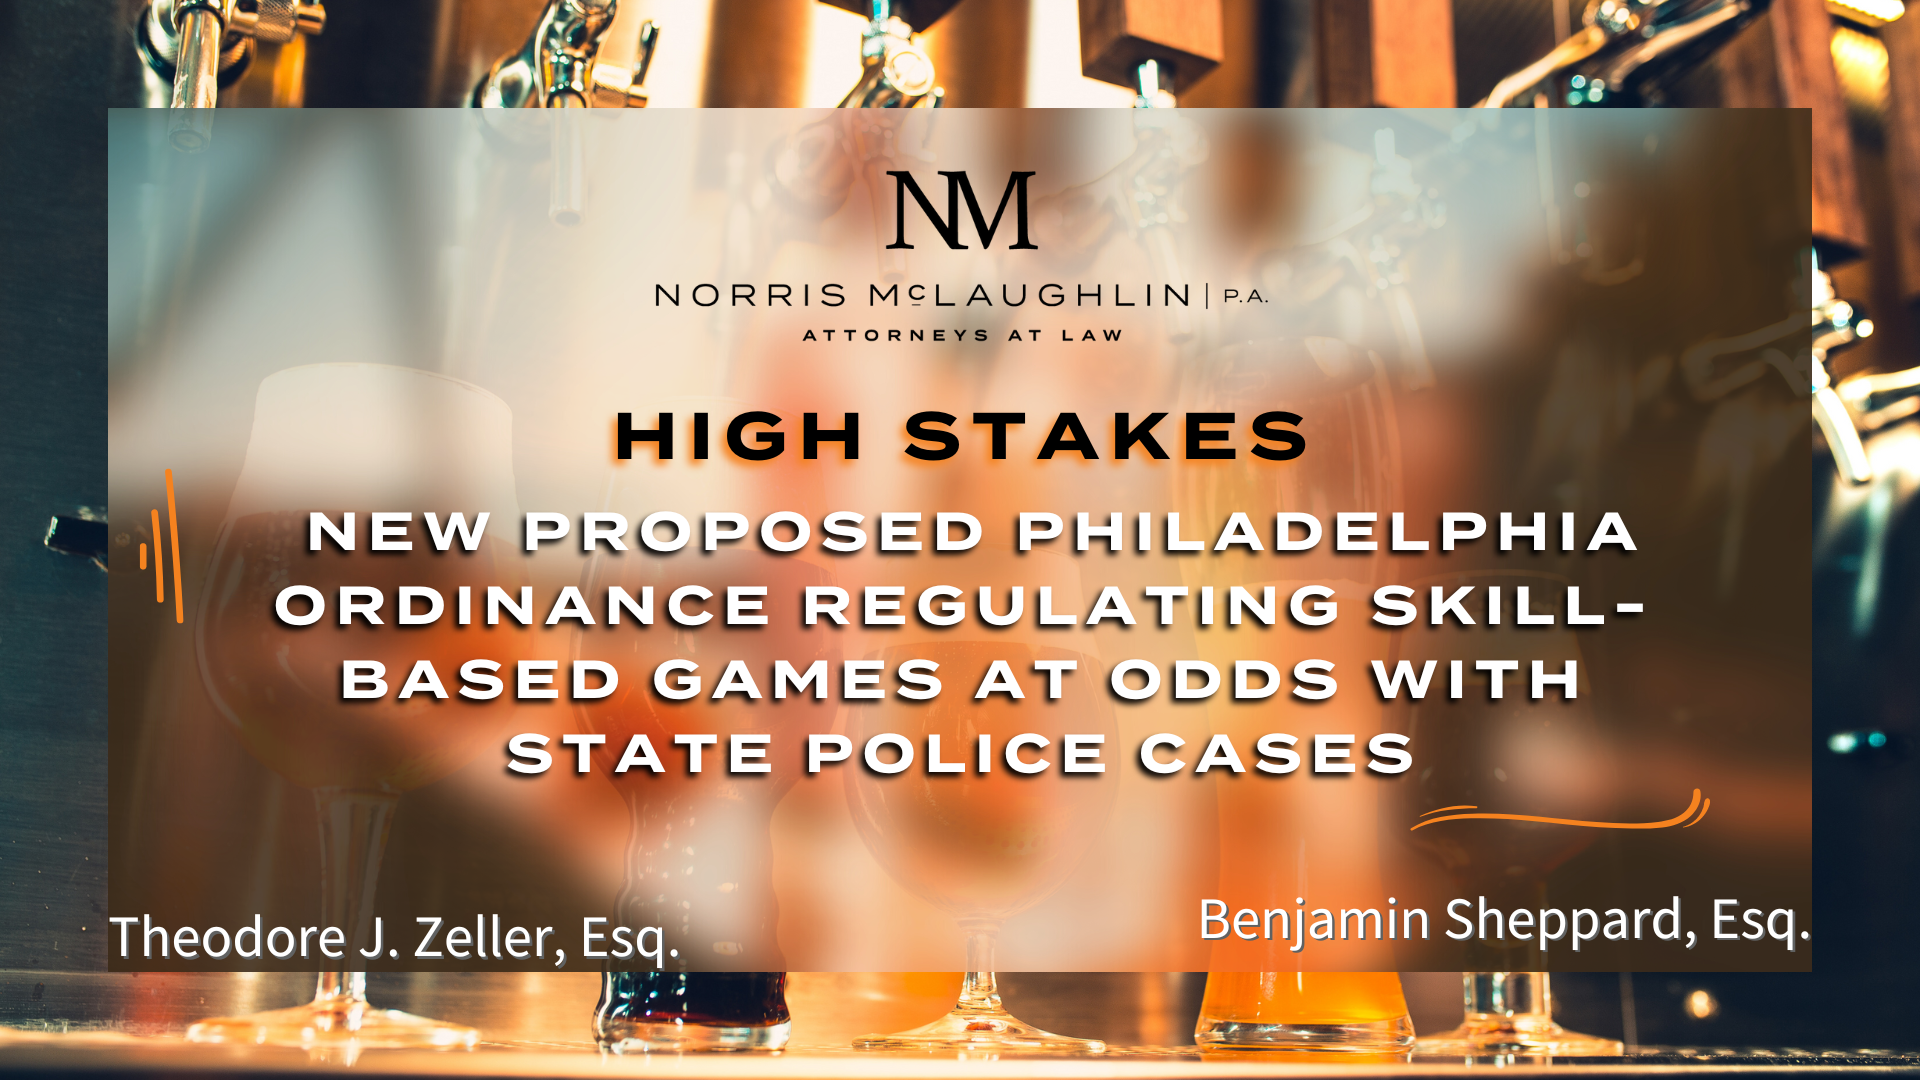 High Stakes: New Proposed Philadelphia Ordinance Regulating Skill-Based Games at Odds with State Police Cases